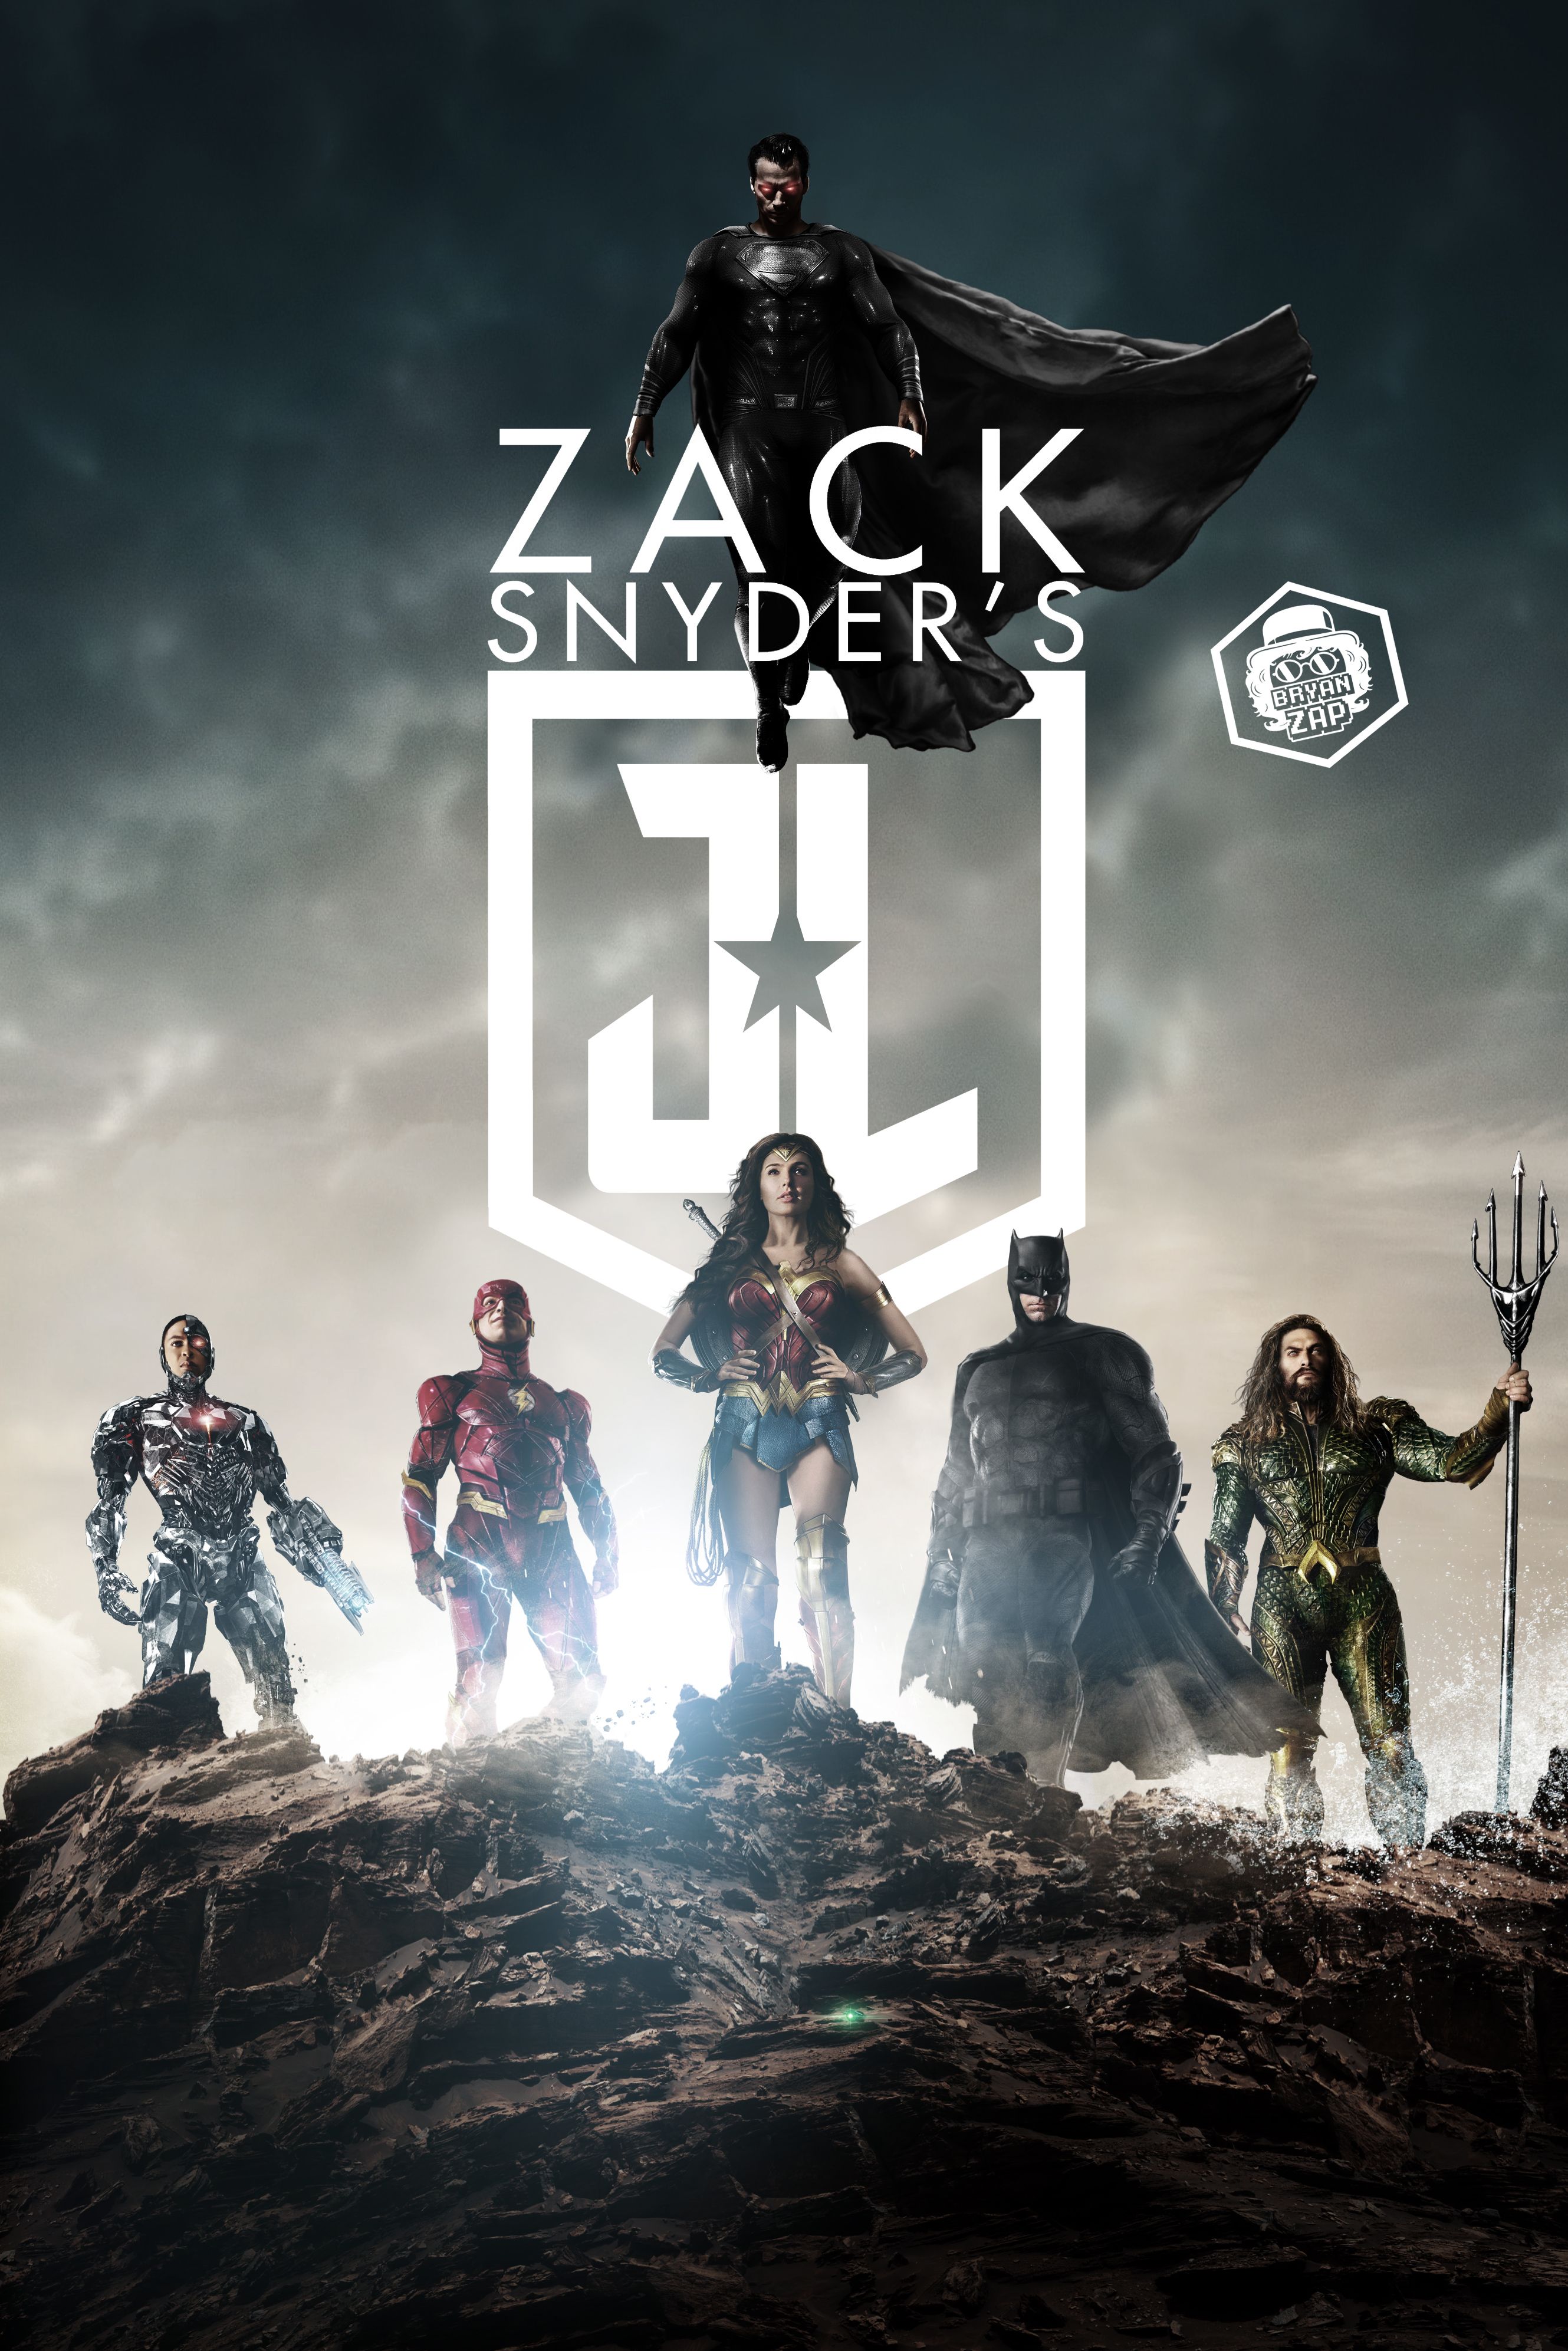 Zack Snyder's Justice League Poster FanArt Wallpaper, HD Movies 4K